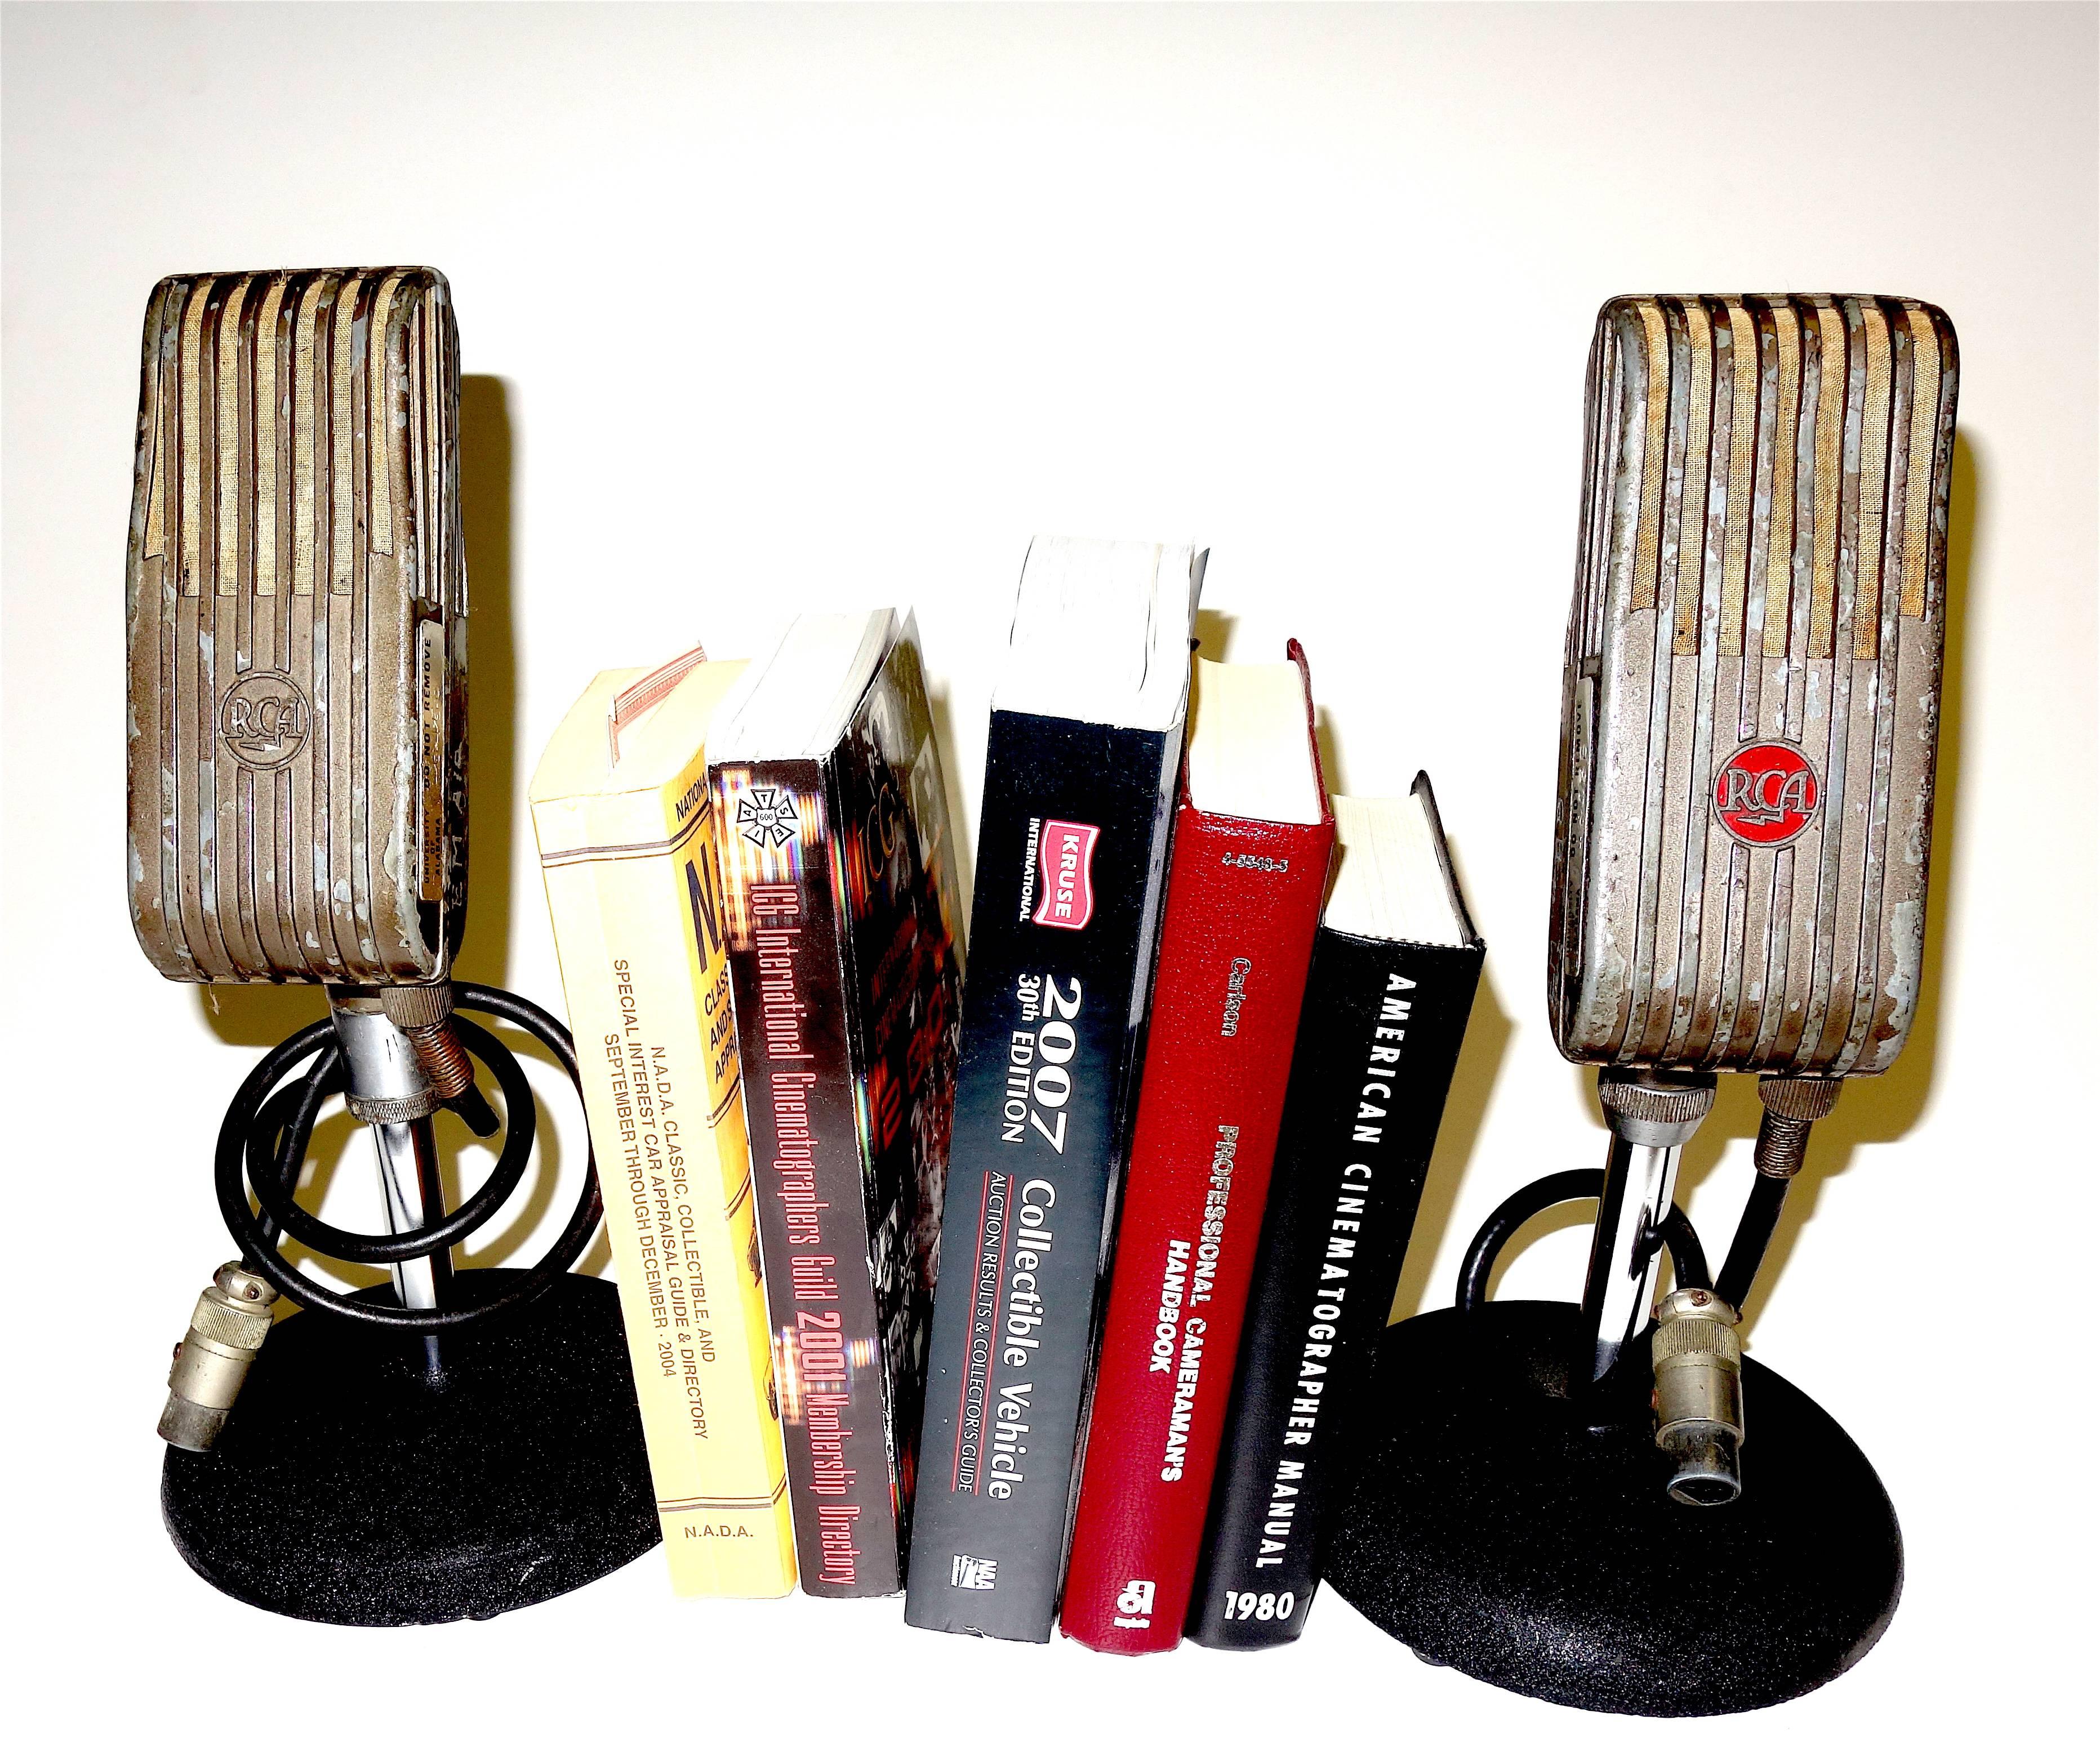 RCA Broadcast Microphones, 1945. As Bookends or Display As Sculpture. ON SALE In Distressed Condition For Sale In Dallas, TX